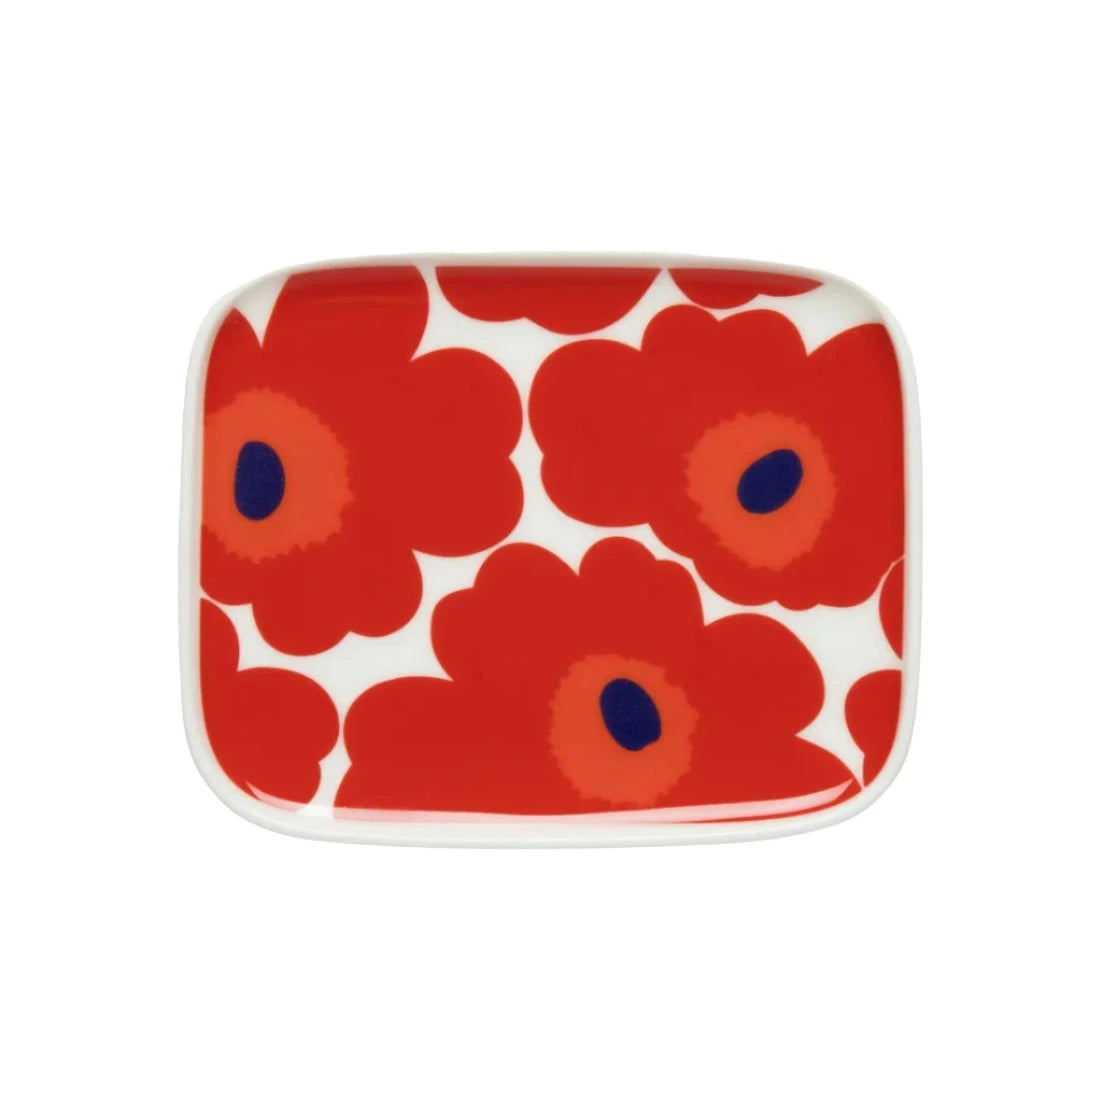 Unikko  Small Plate/ 15x12cm/ Red & Blue/Small Plate